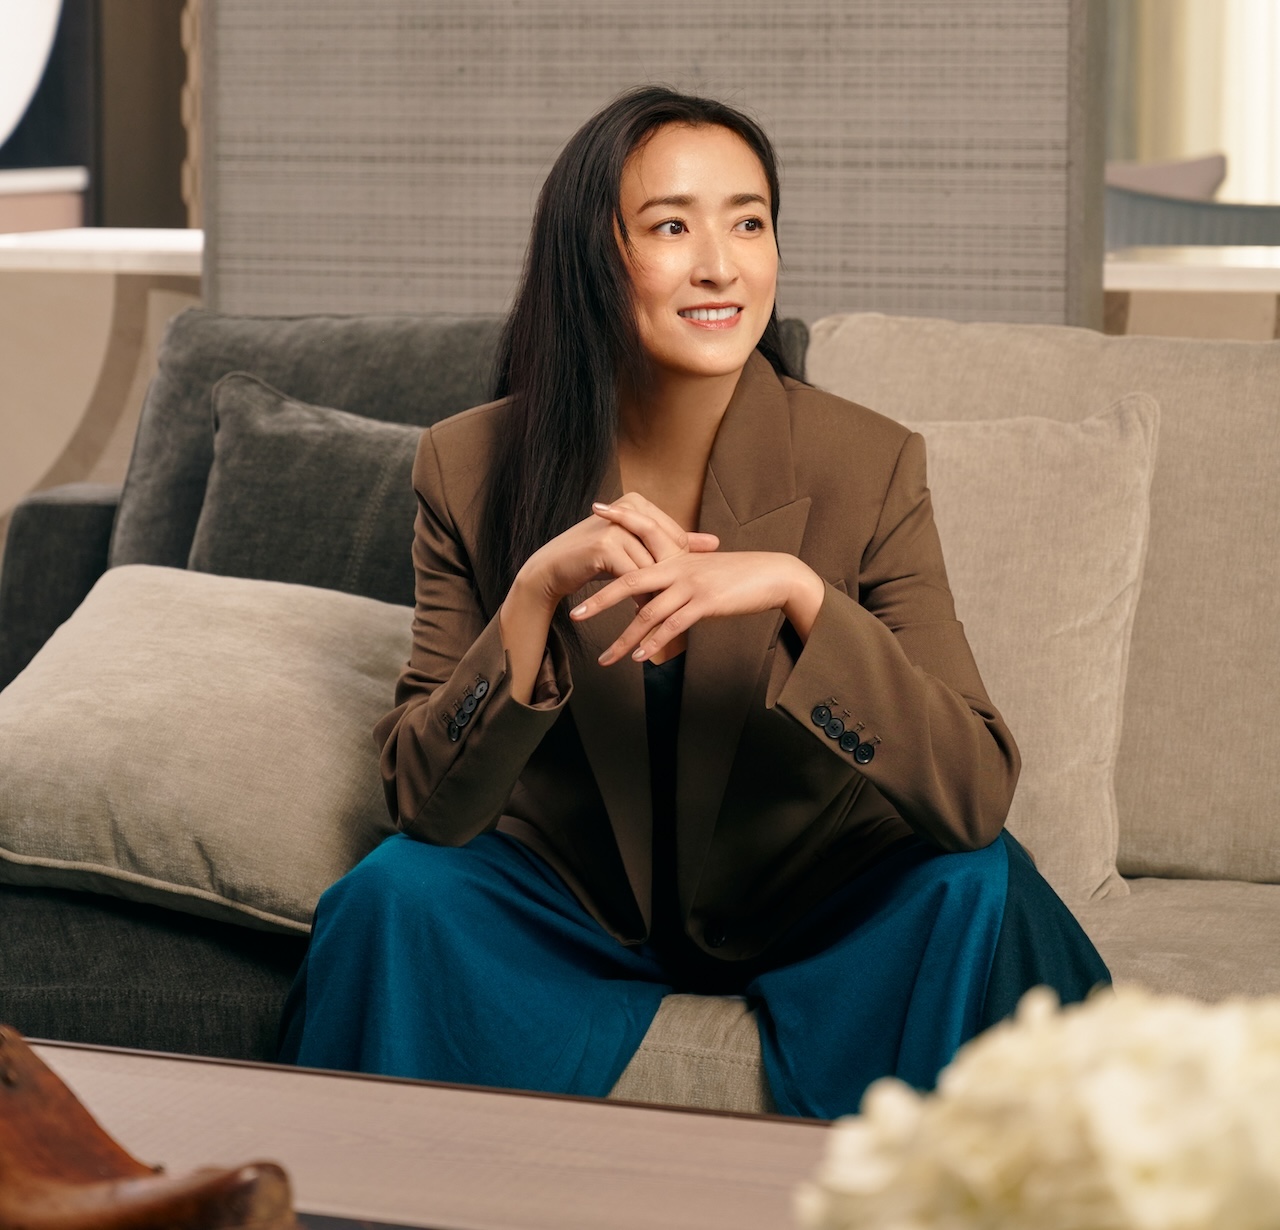 Designer Celia Chu, whose recent projects include Rosewood Bangkok, says there’s a thirst for the avant-garde alongside eco-conscious builds right now.